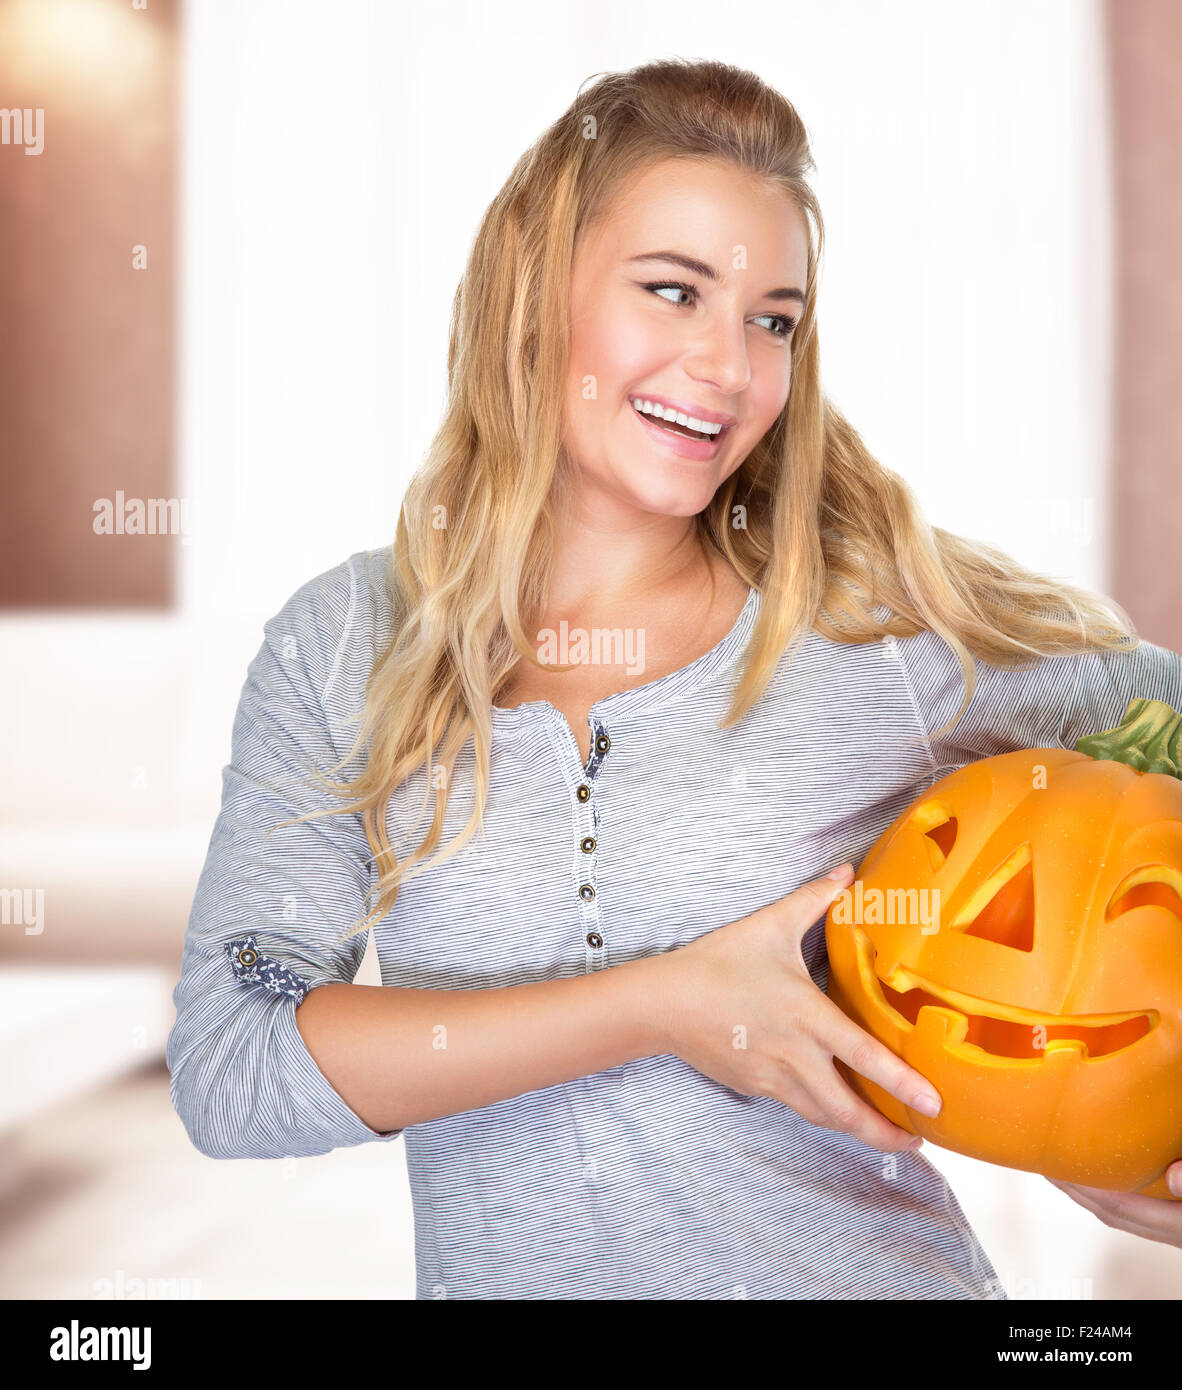 Happy woman on Halloween party at home, holding in hands carved pumpkin face, enjoying traditional autumn holiday Stock Photo